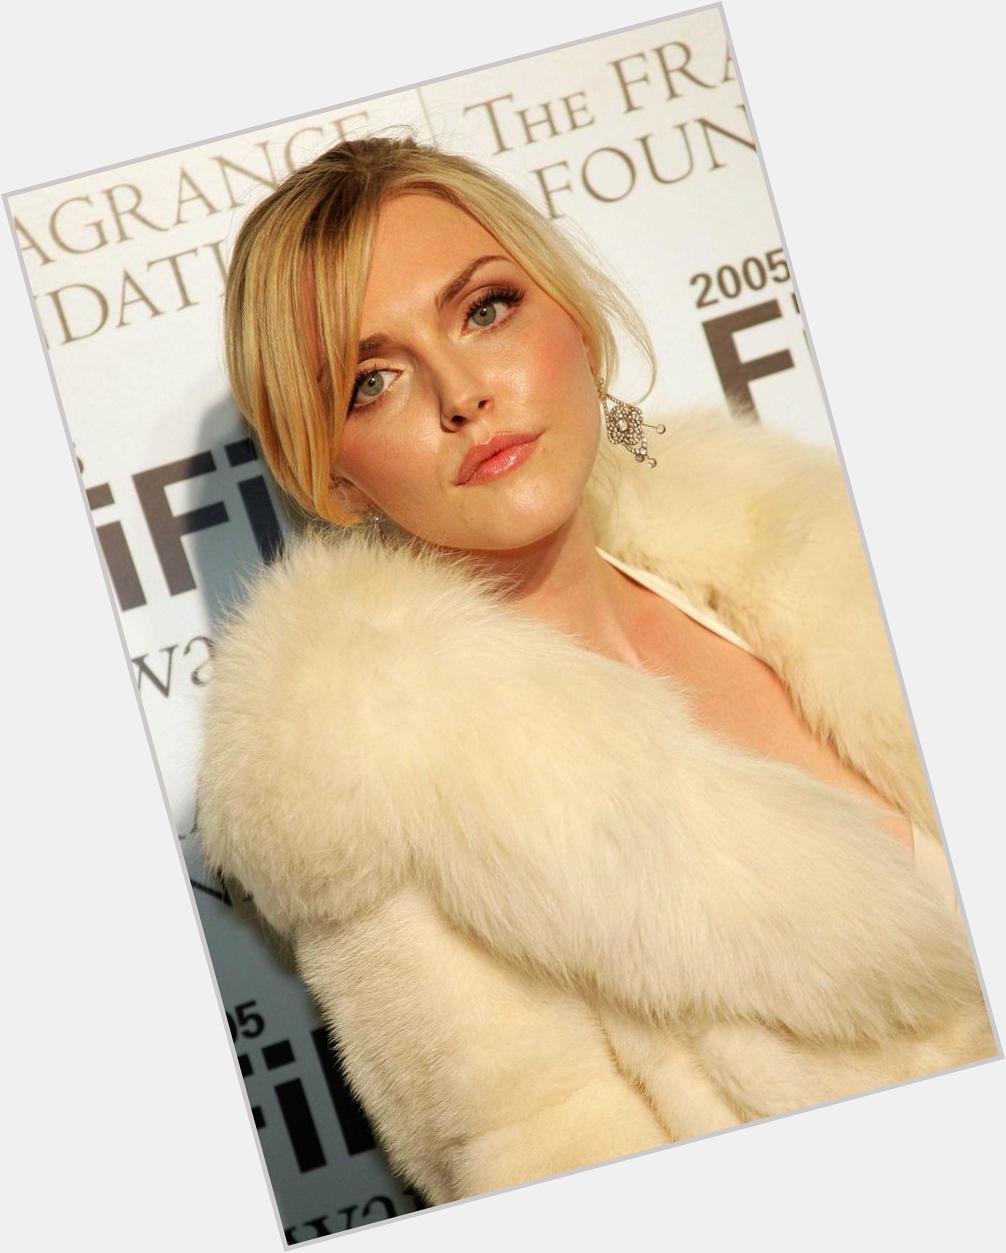 A very happy FURRY BIRTHDAY to English author and former fashion model Sophie Dahl, wife of singer Jamie Cullum. 